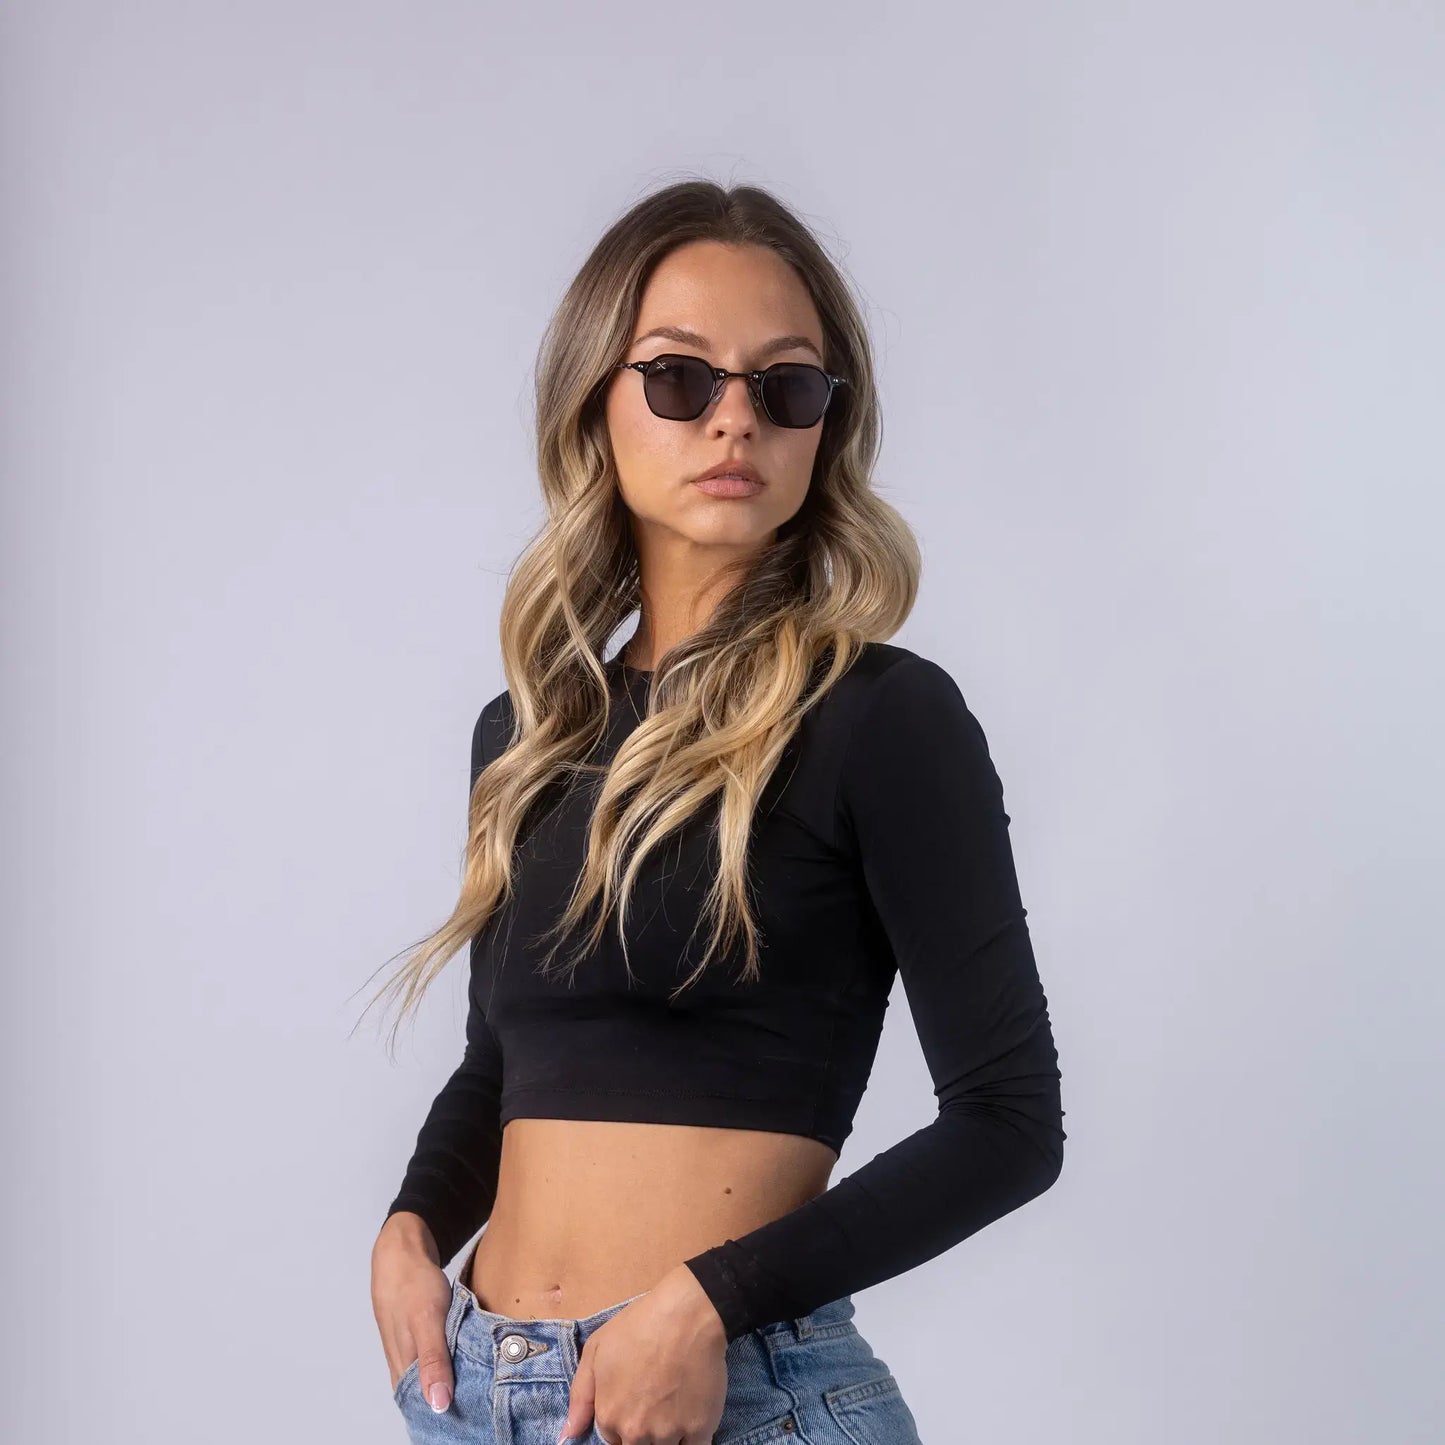 A female model wearing Exposure Sunglasses polarized sunglasses with black frames and black lenses, posing against a white background.